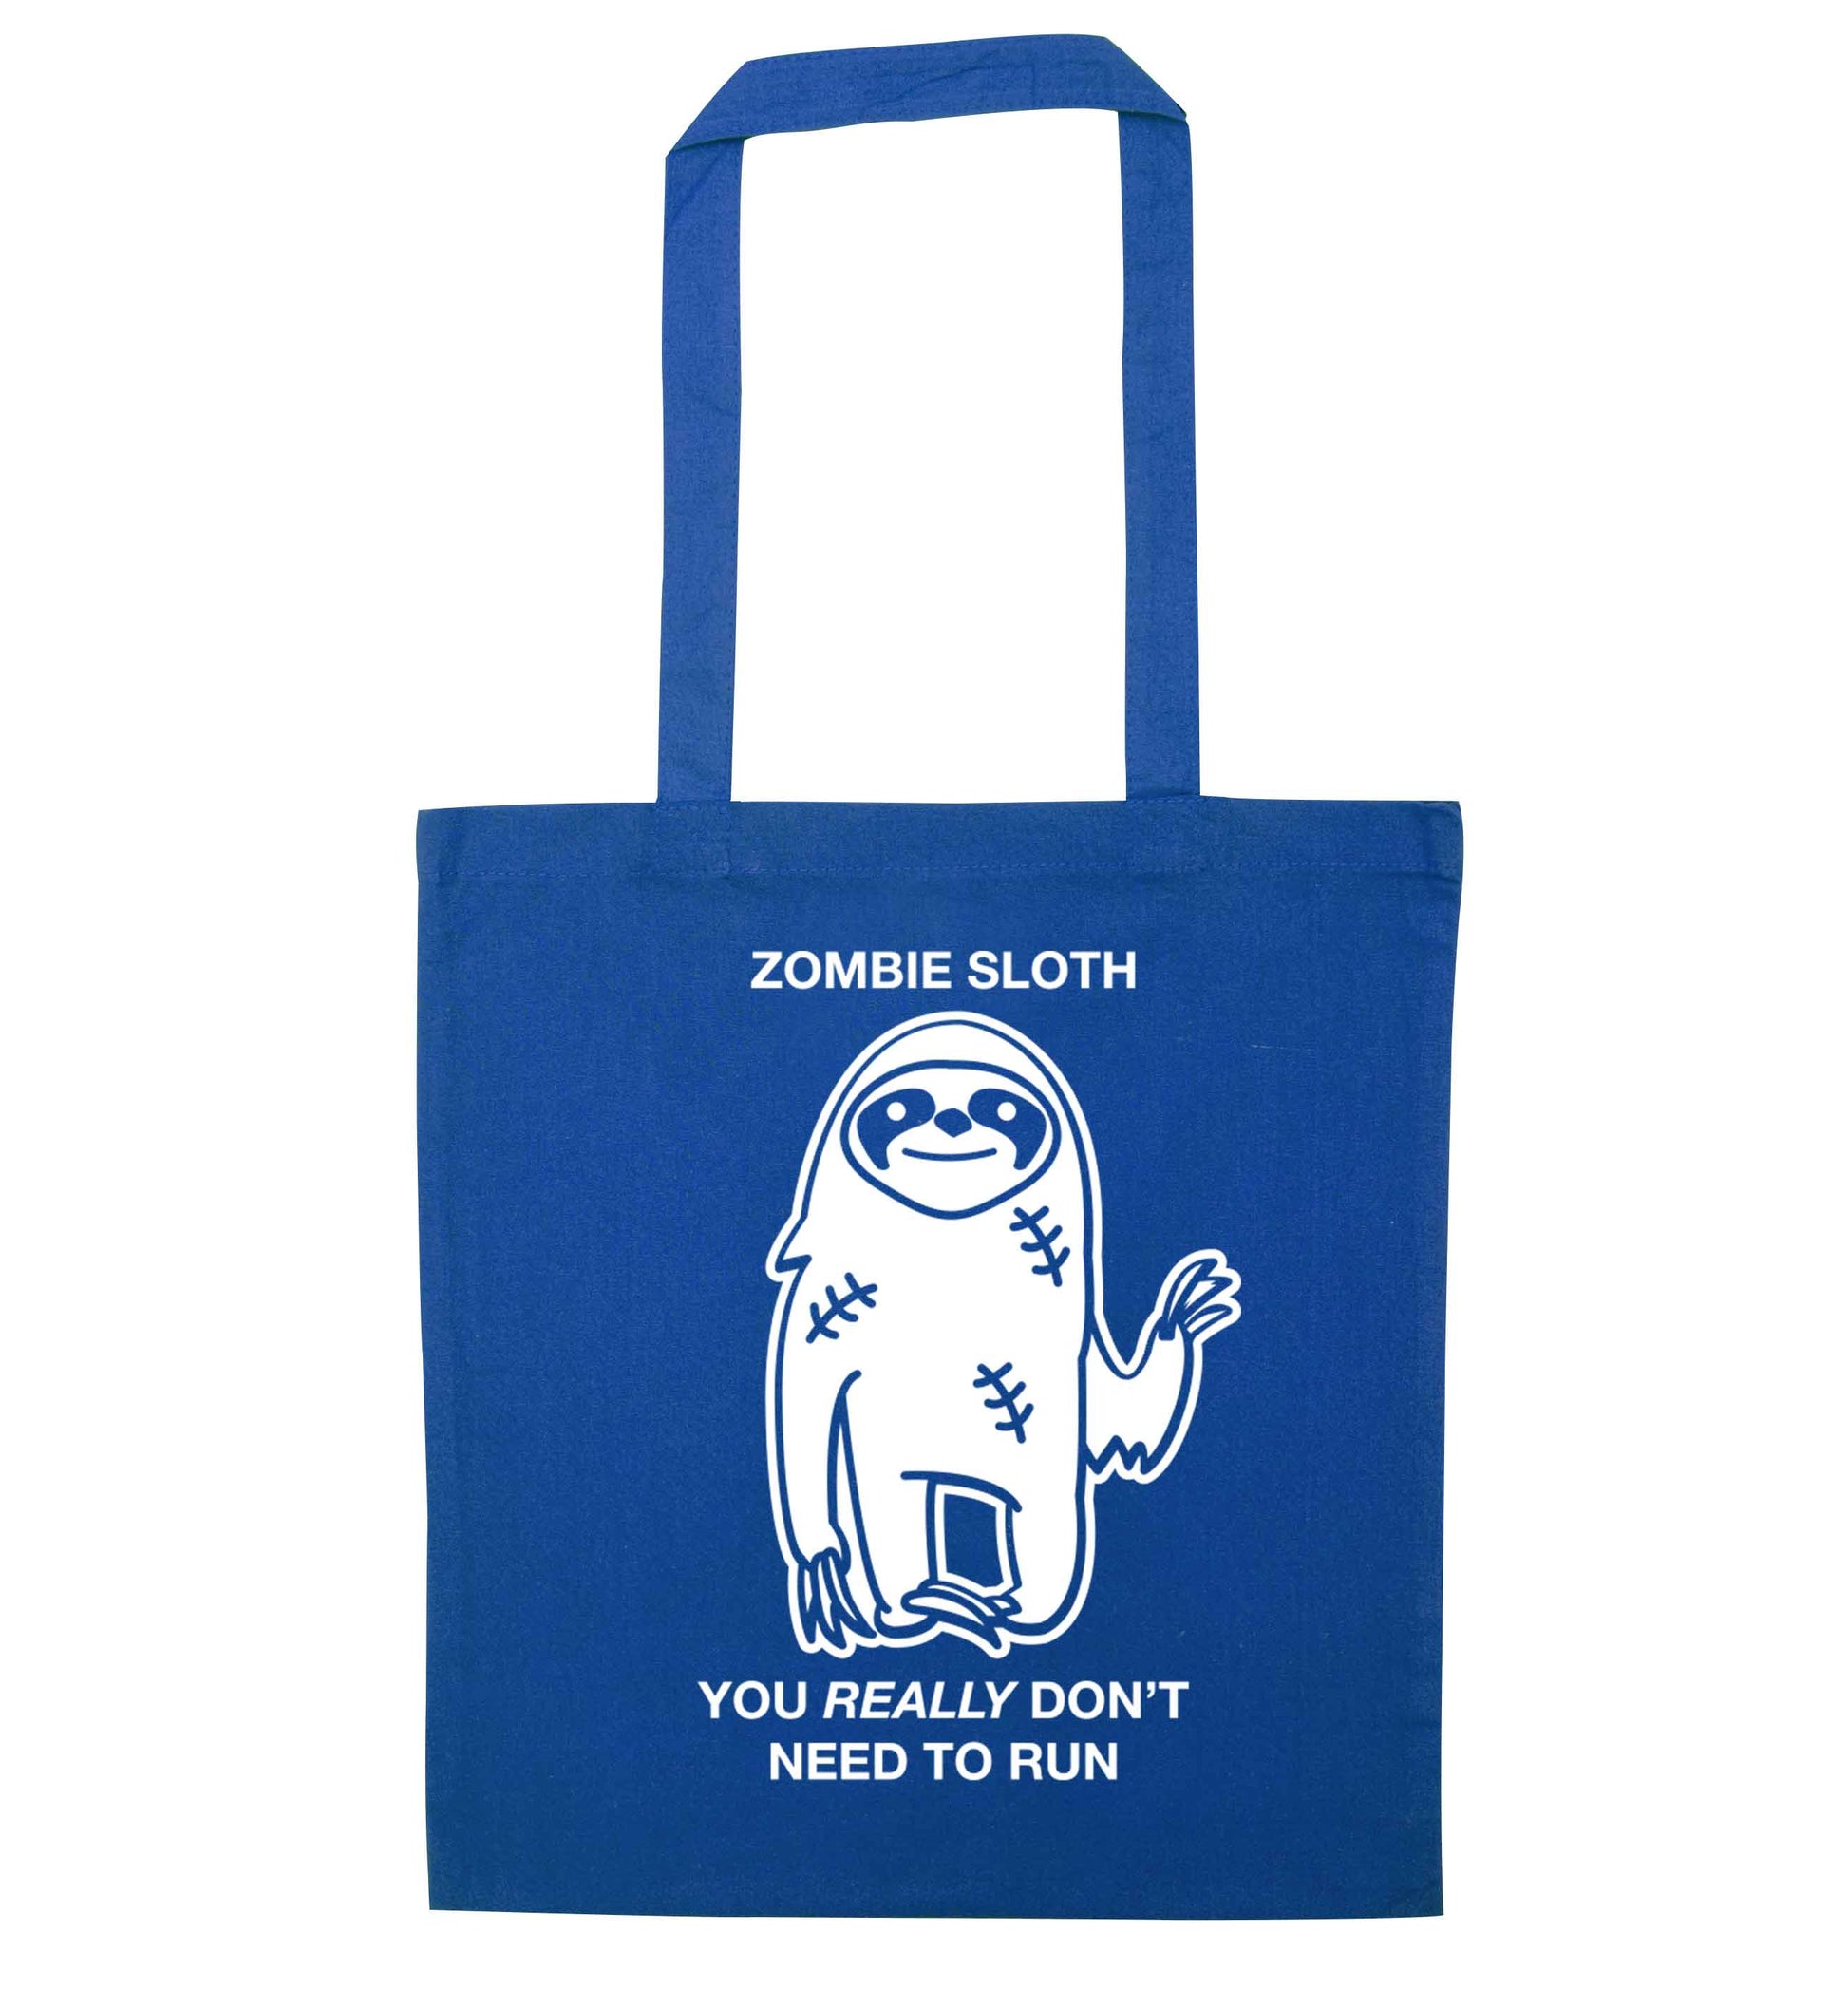 Zombie sloth you really don't need to run blue tote bag